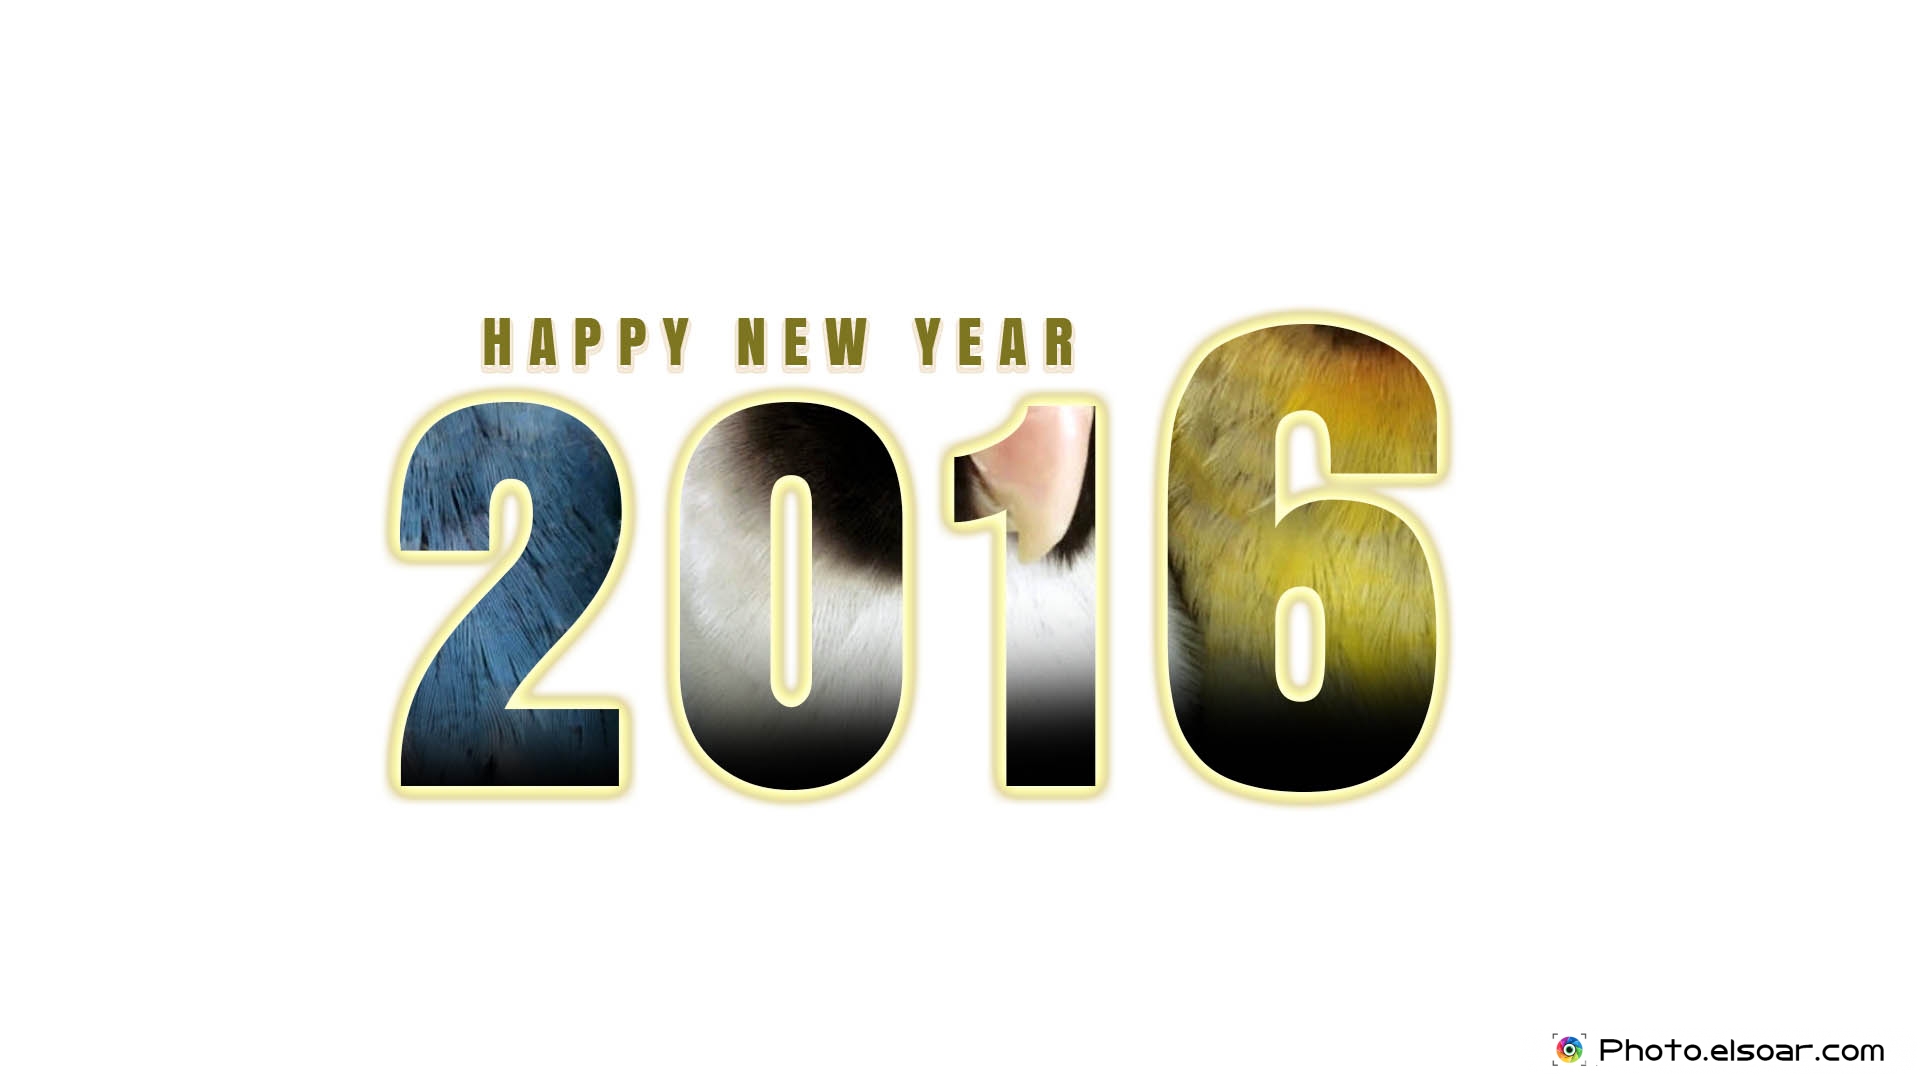 Happy New Year Images Wallpapers And Greeting Cards